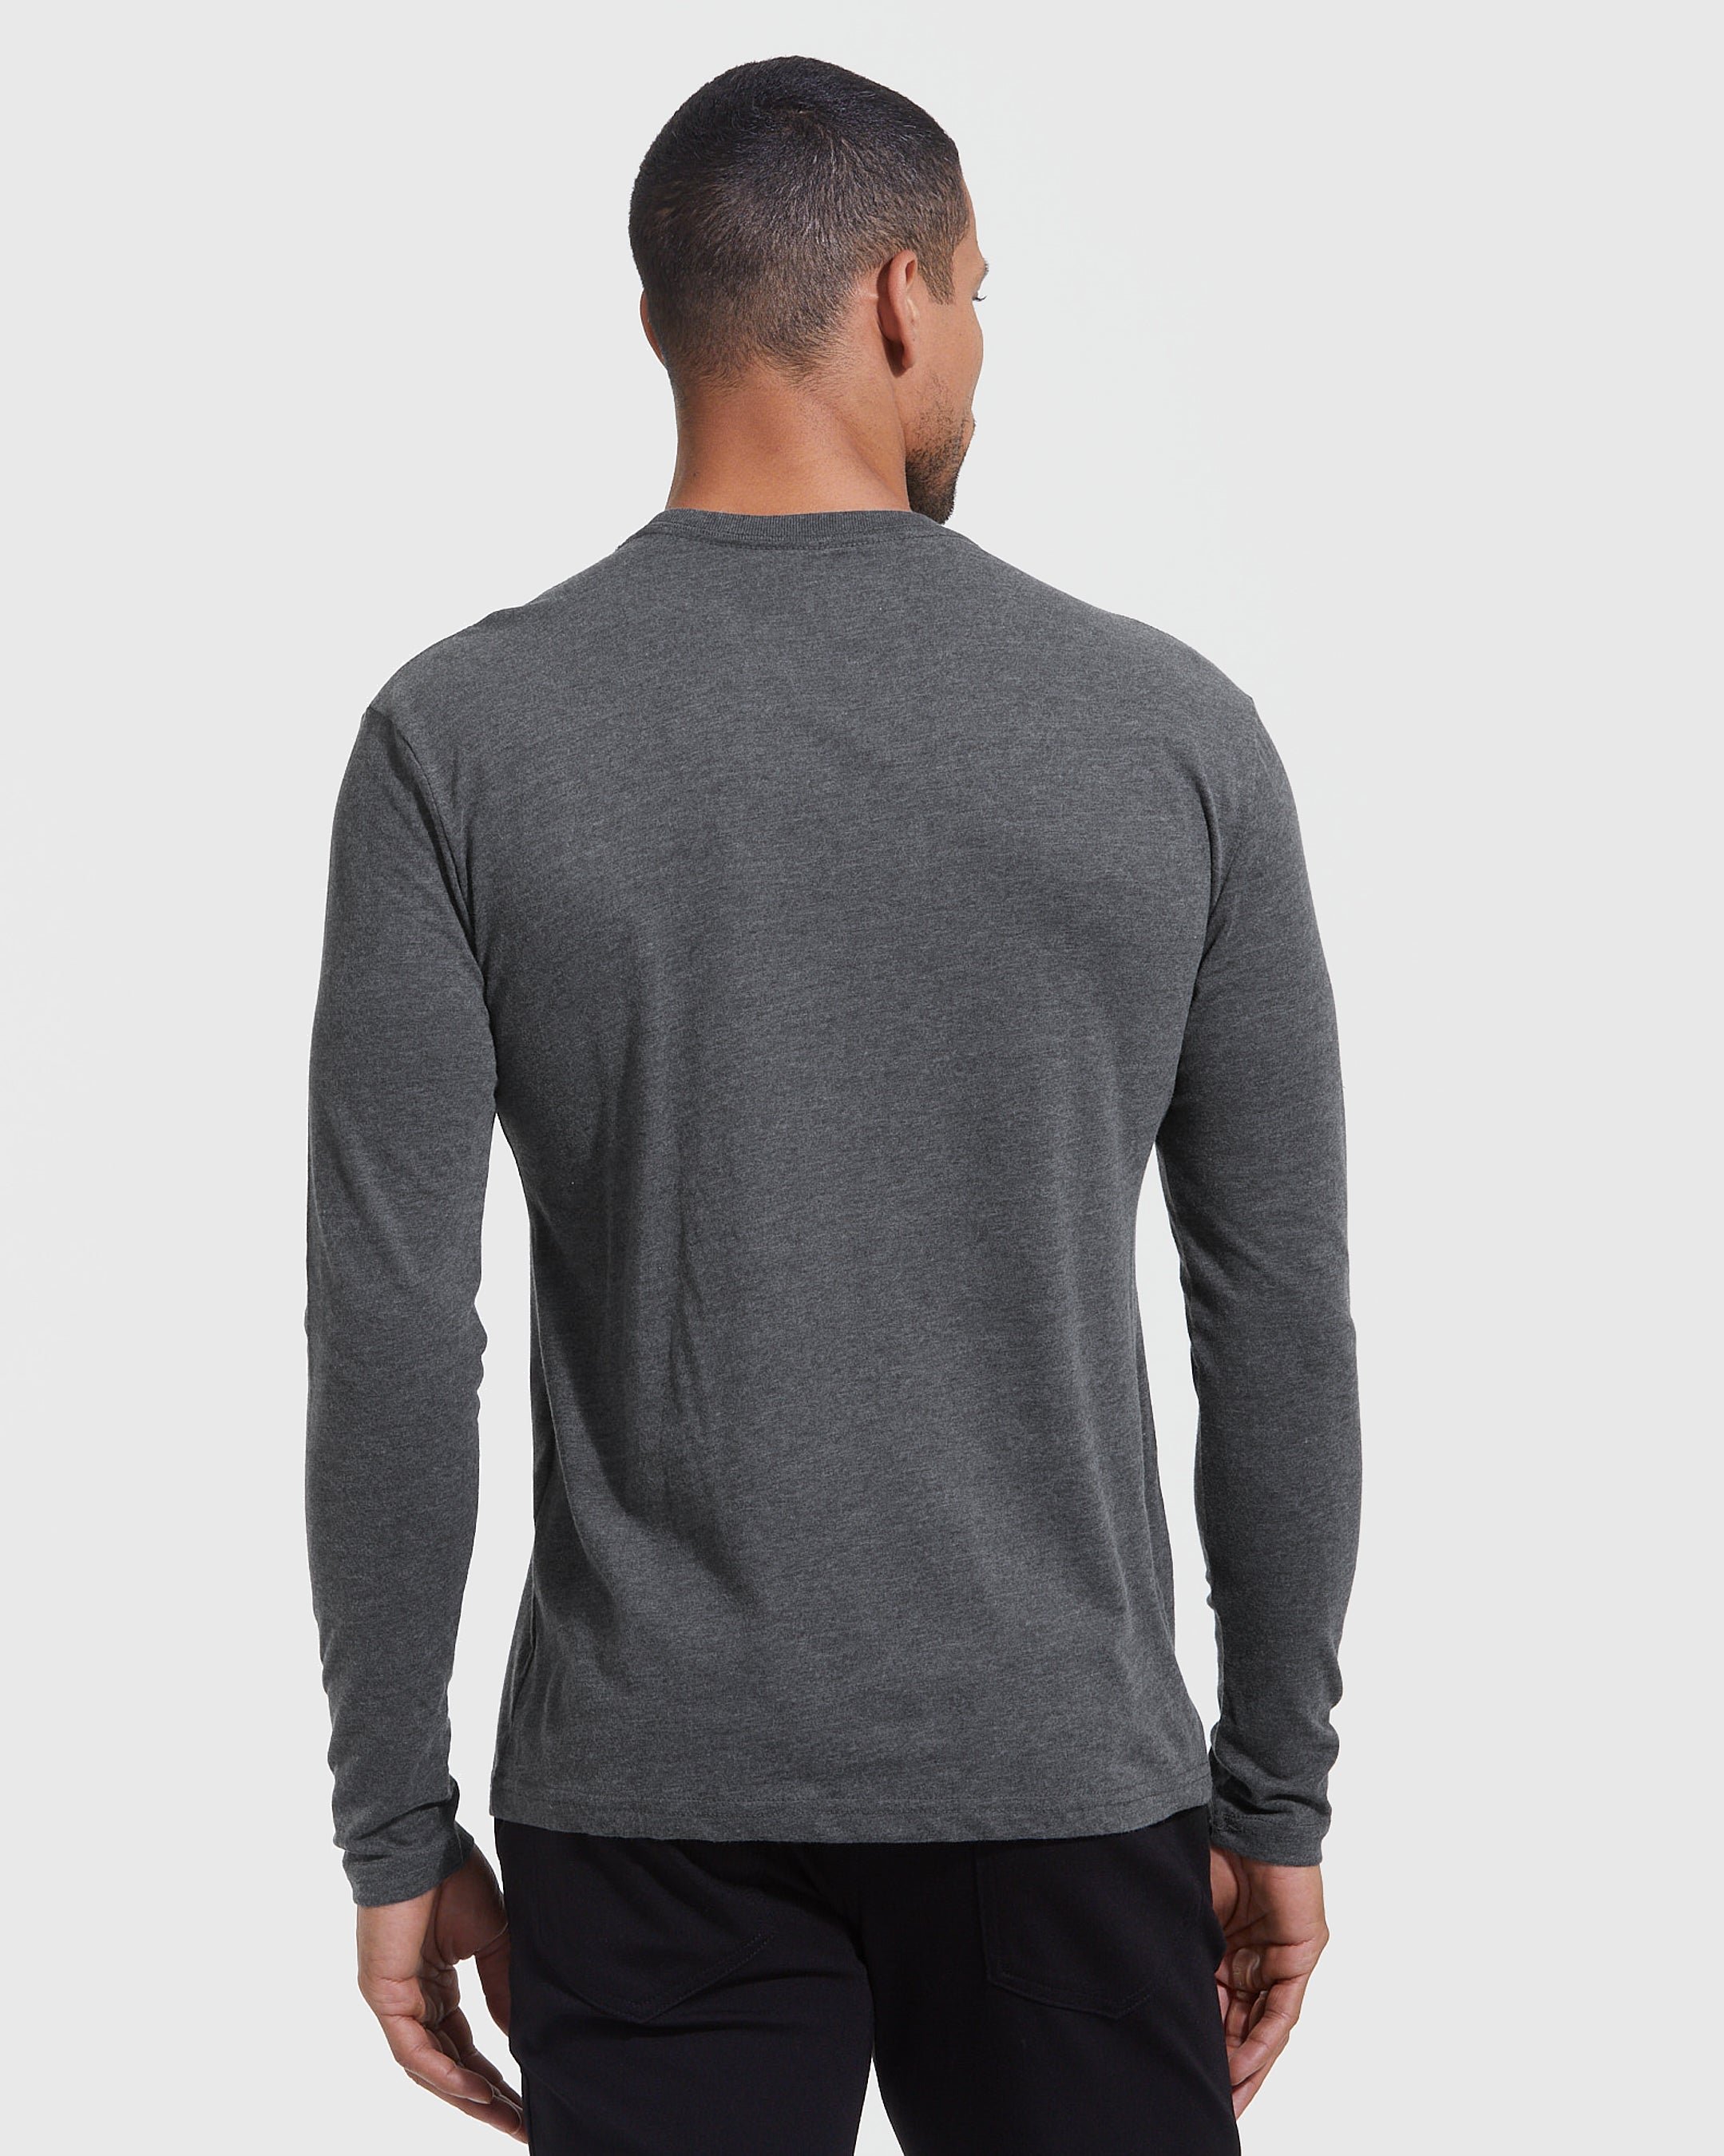 The Heather Grays Long Sleeve Crew Neck 3-Pack